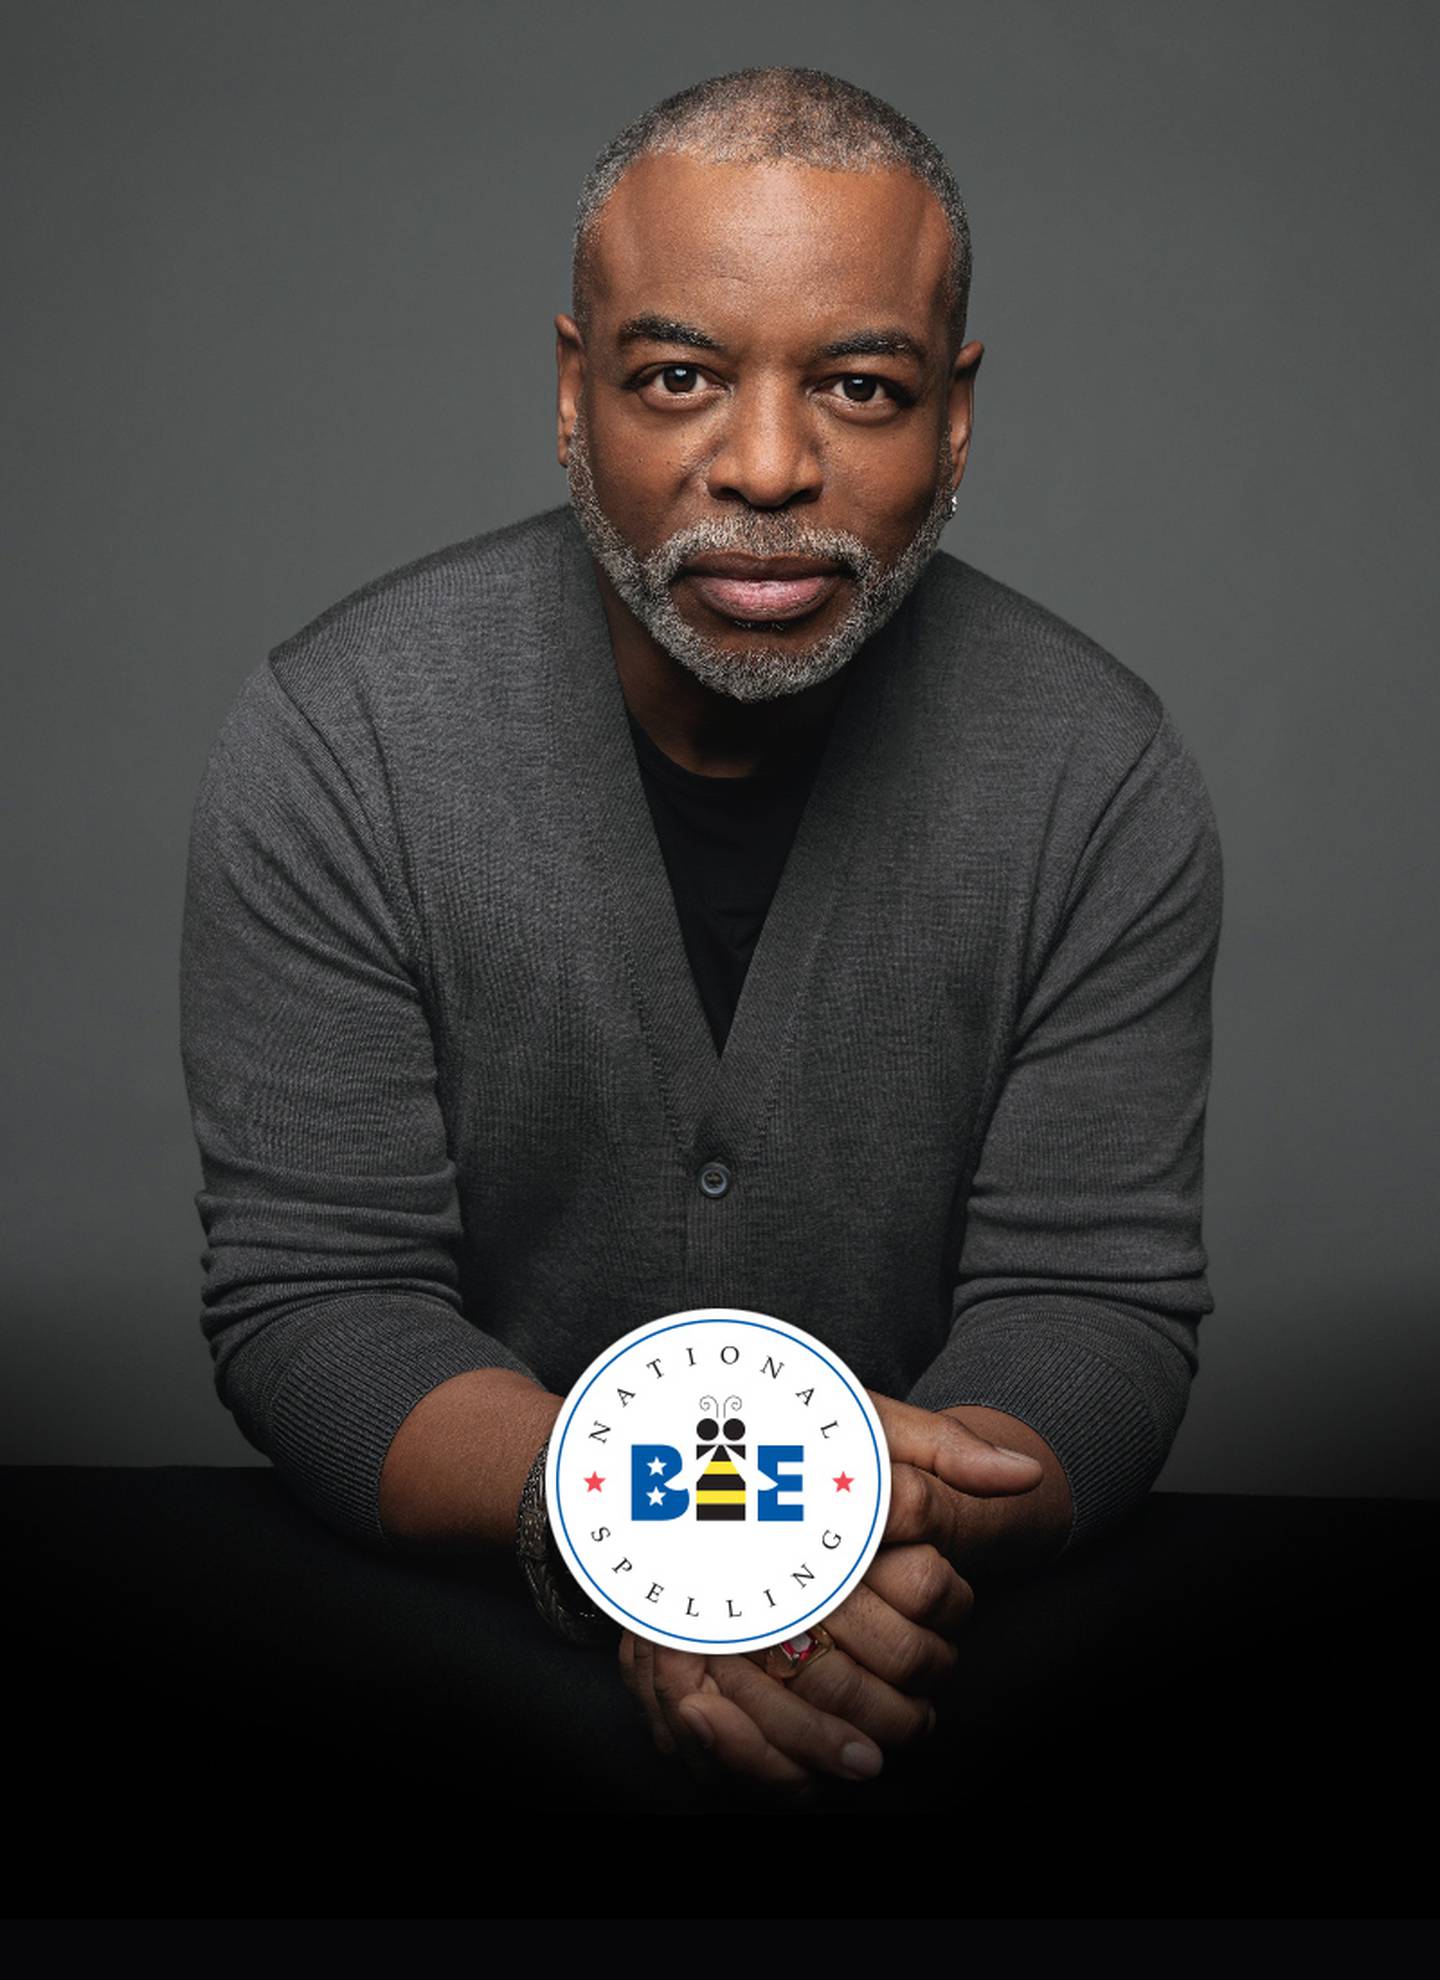 LeVar Burton, actor and children's literacy advocate, will serve as the host for the Scripps National Spelling Bee.